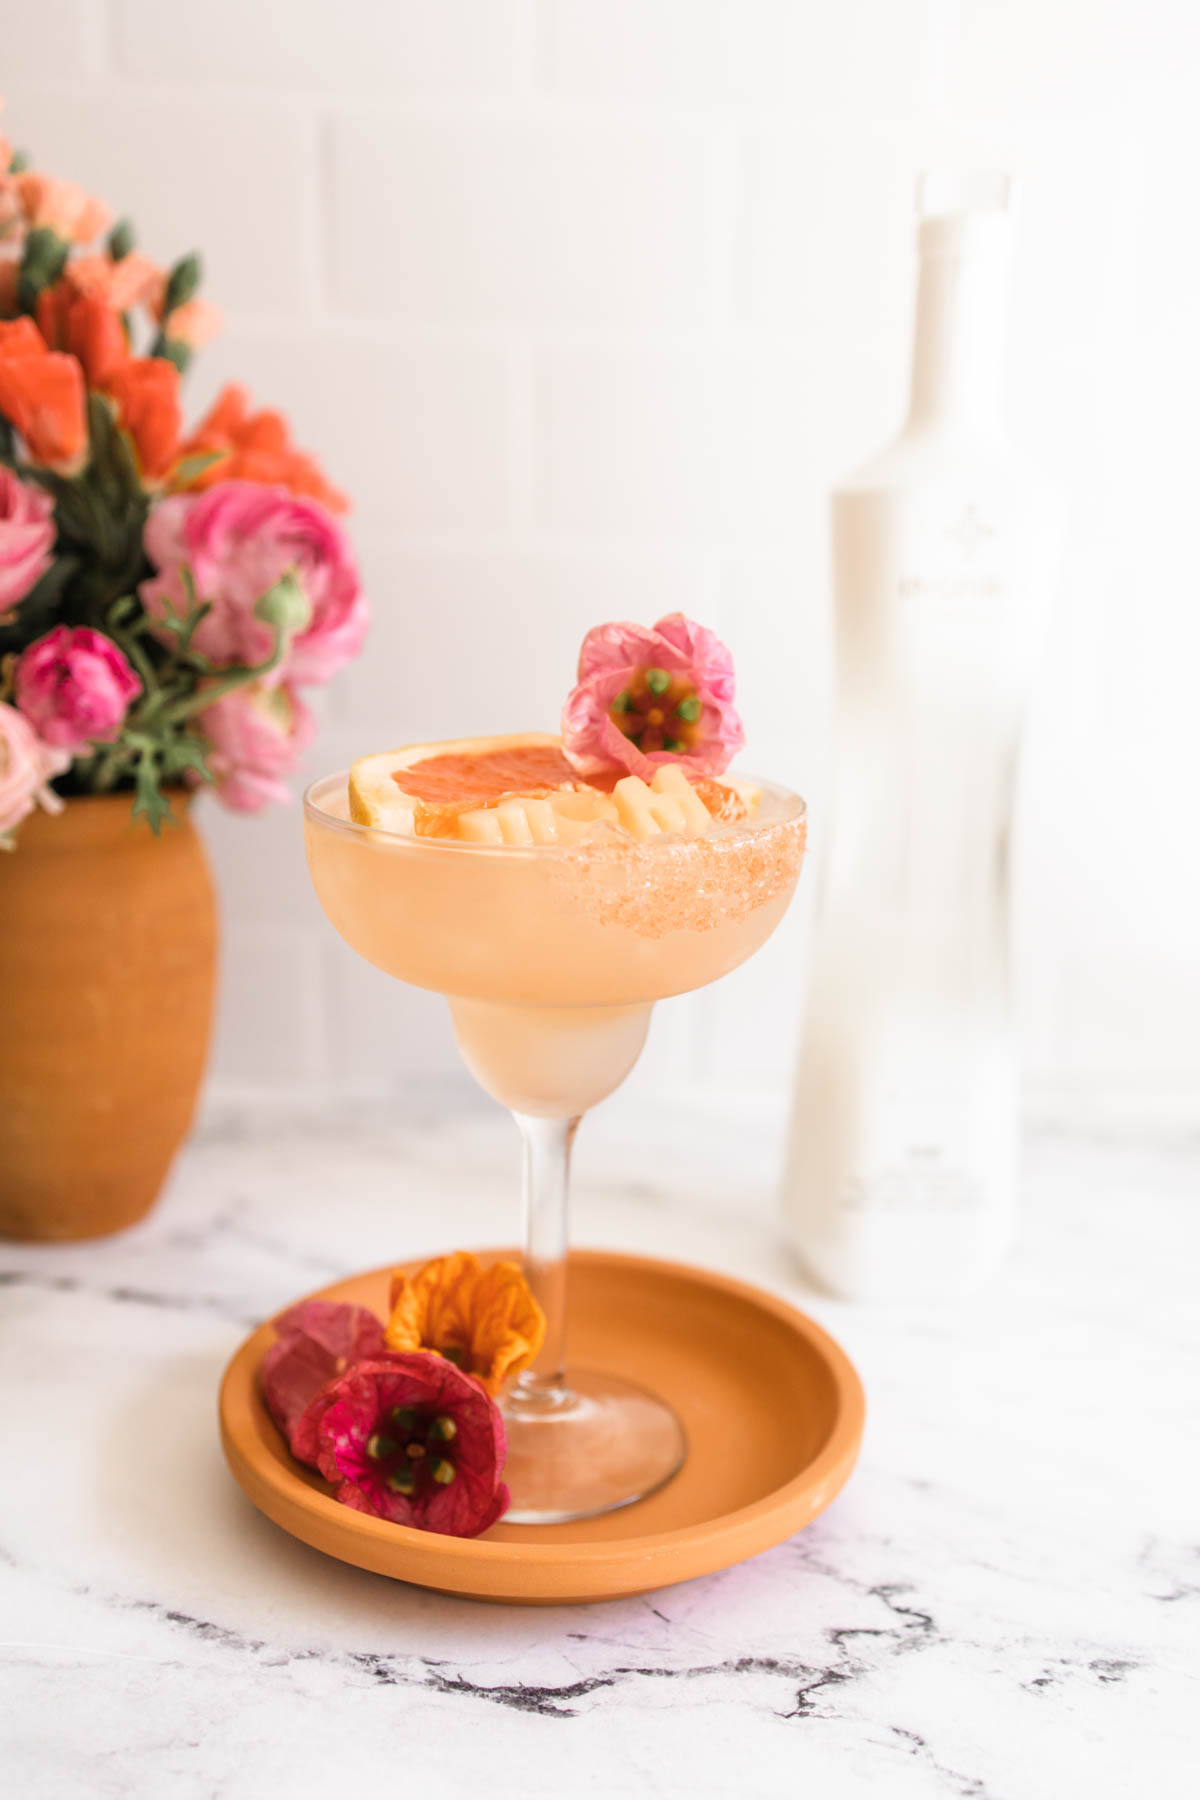 A lovely pink rose margarita on a margarita glass garnished with grapefruit wedge, a pink flower, and grapefruit-flavor salt as well as MOM ice cubes.